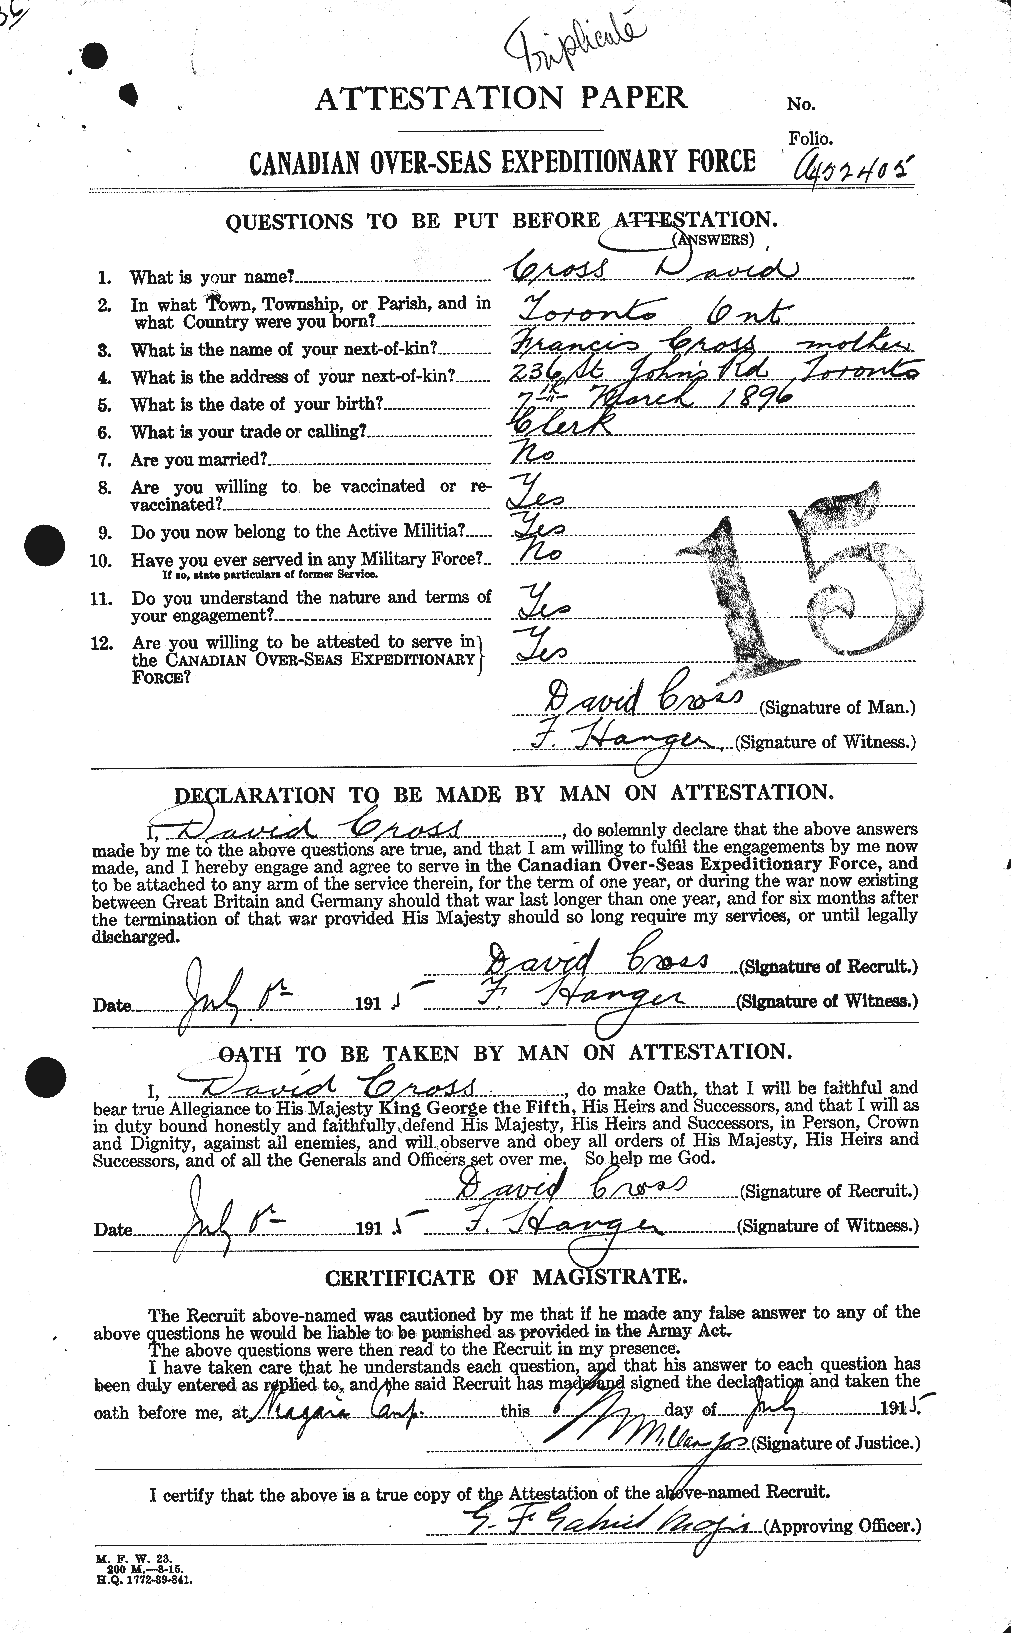 Personnel Records of the First World War - CEF 064888a